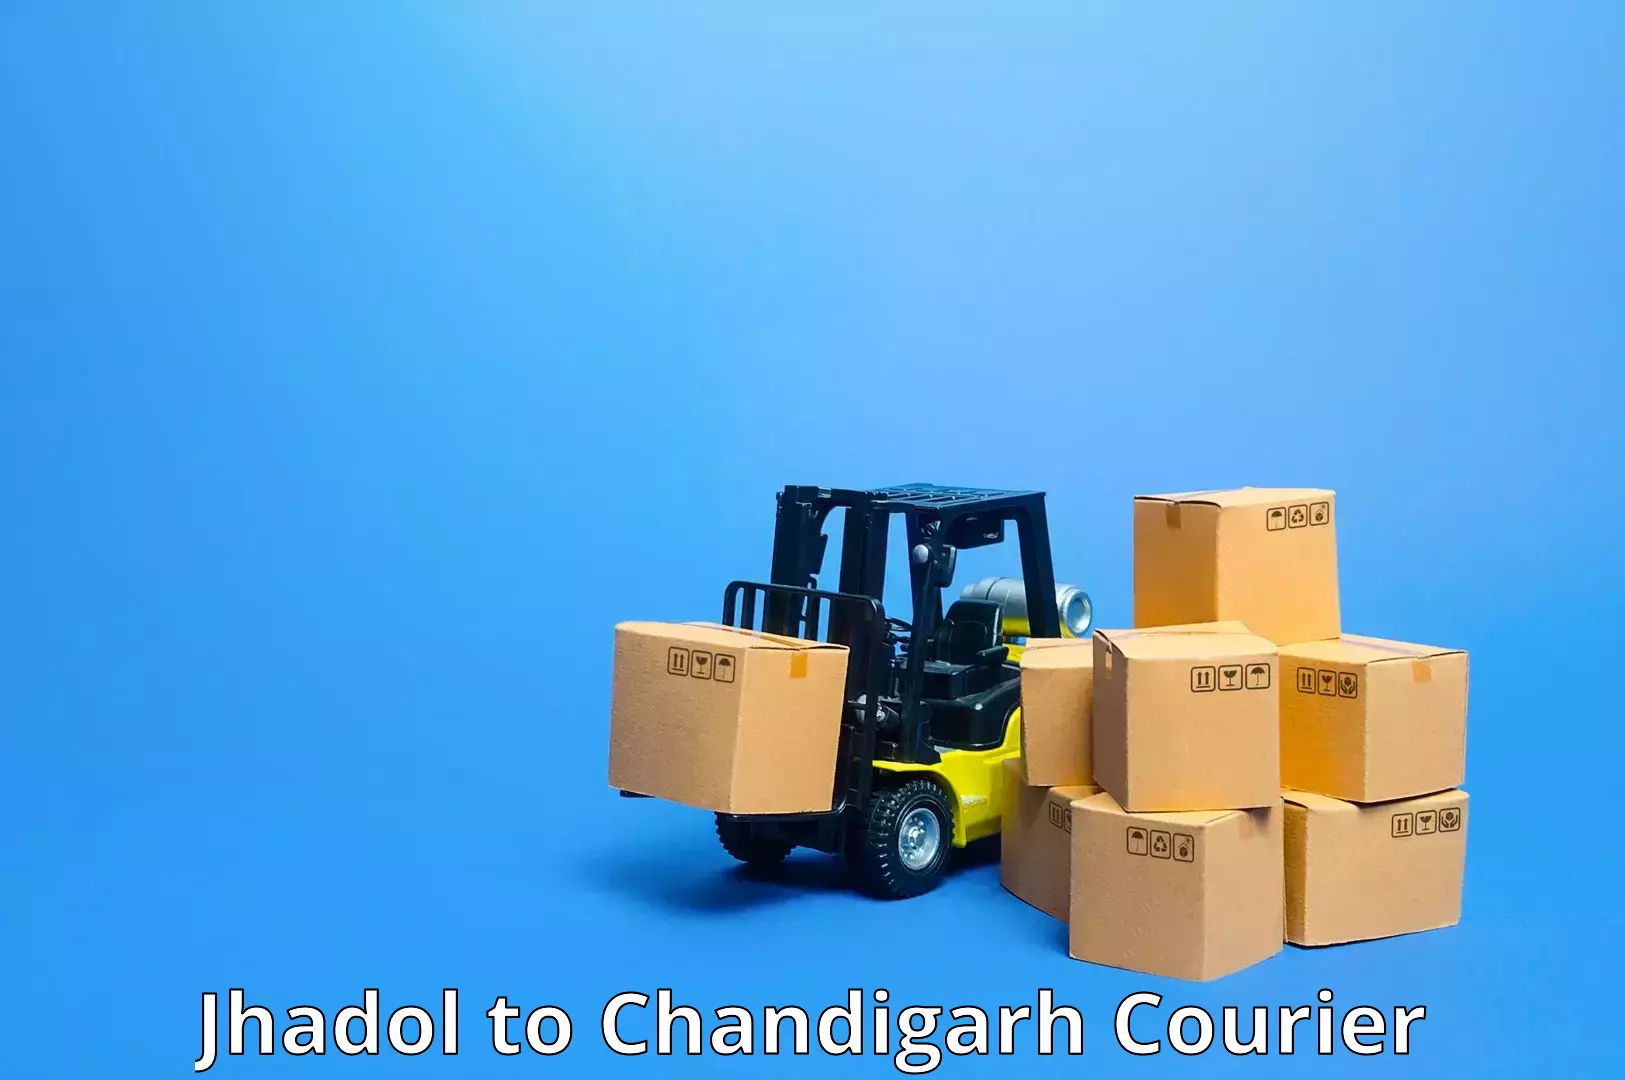 Affordable shipping solutions Jhadol to Chandigarh